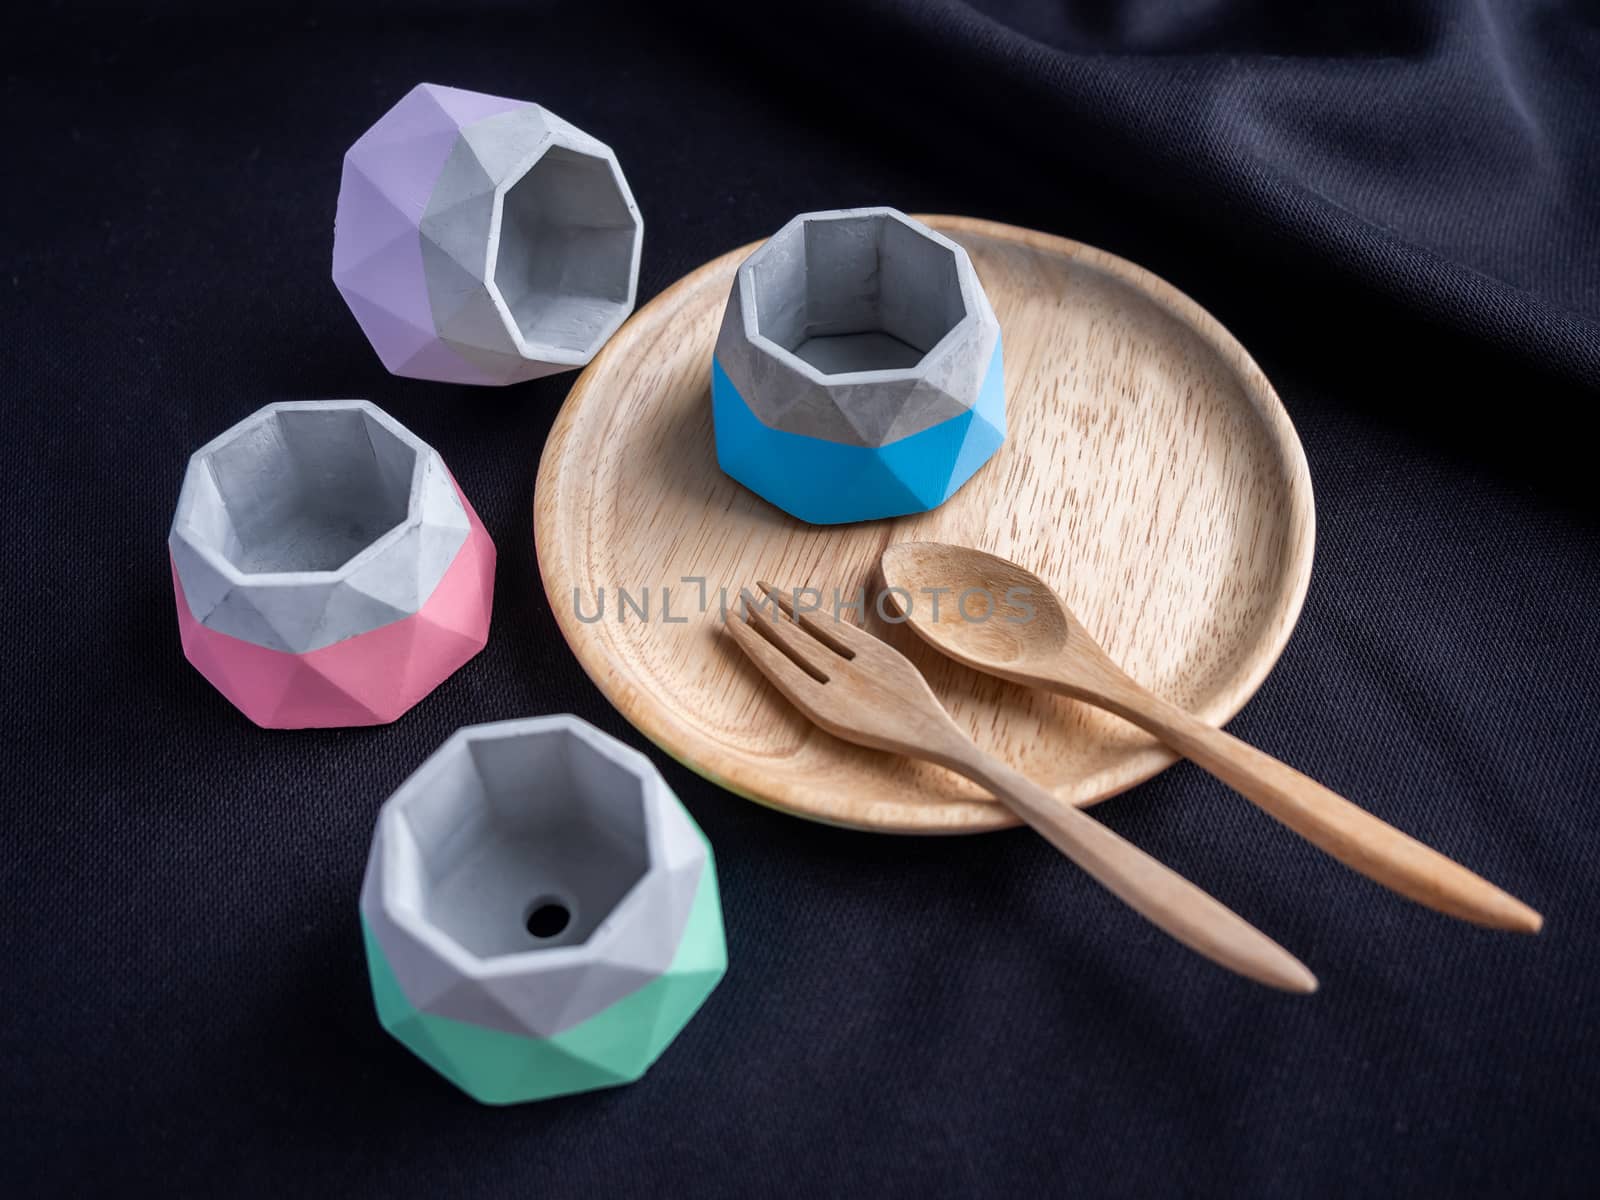 Cactus pot. Concrete pot. Beautiful empty small modern geometric concrete planters with painted on wooden plate on black fabric background.